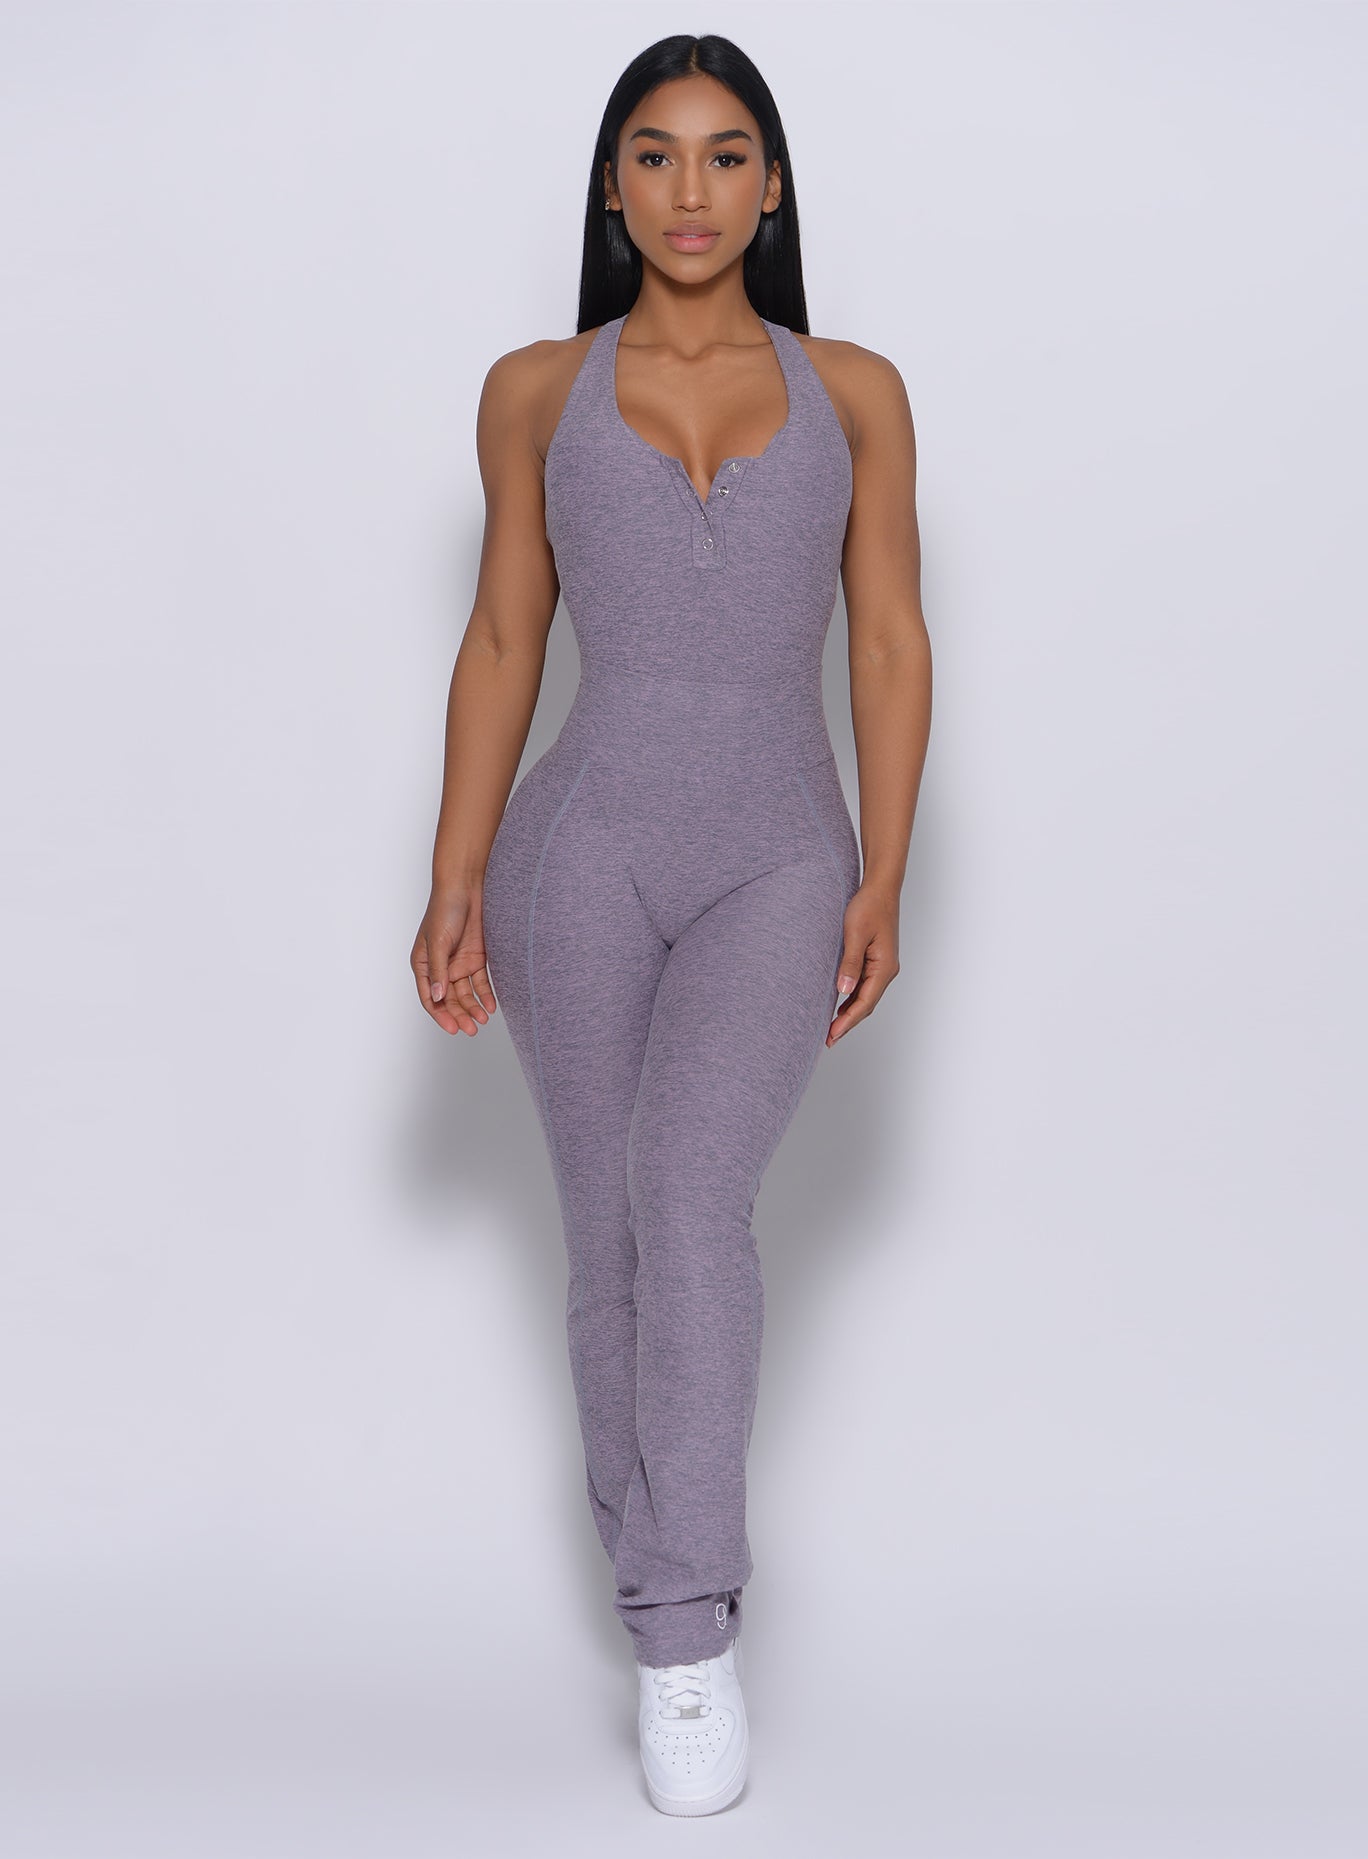 Front profile view view of a model facing forward wearing our straight up leggings in orchid color and a matching bodysuit